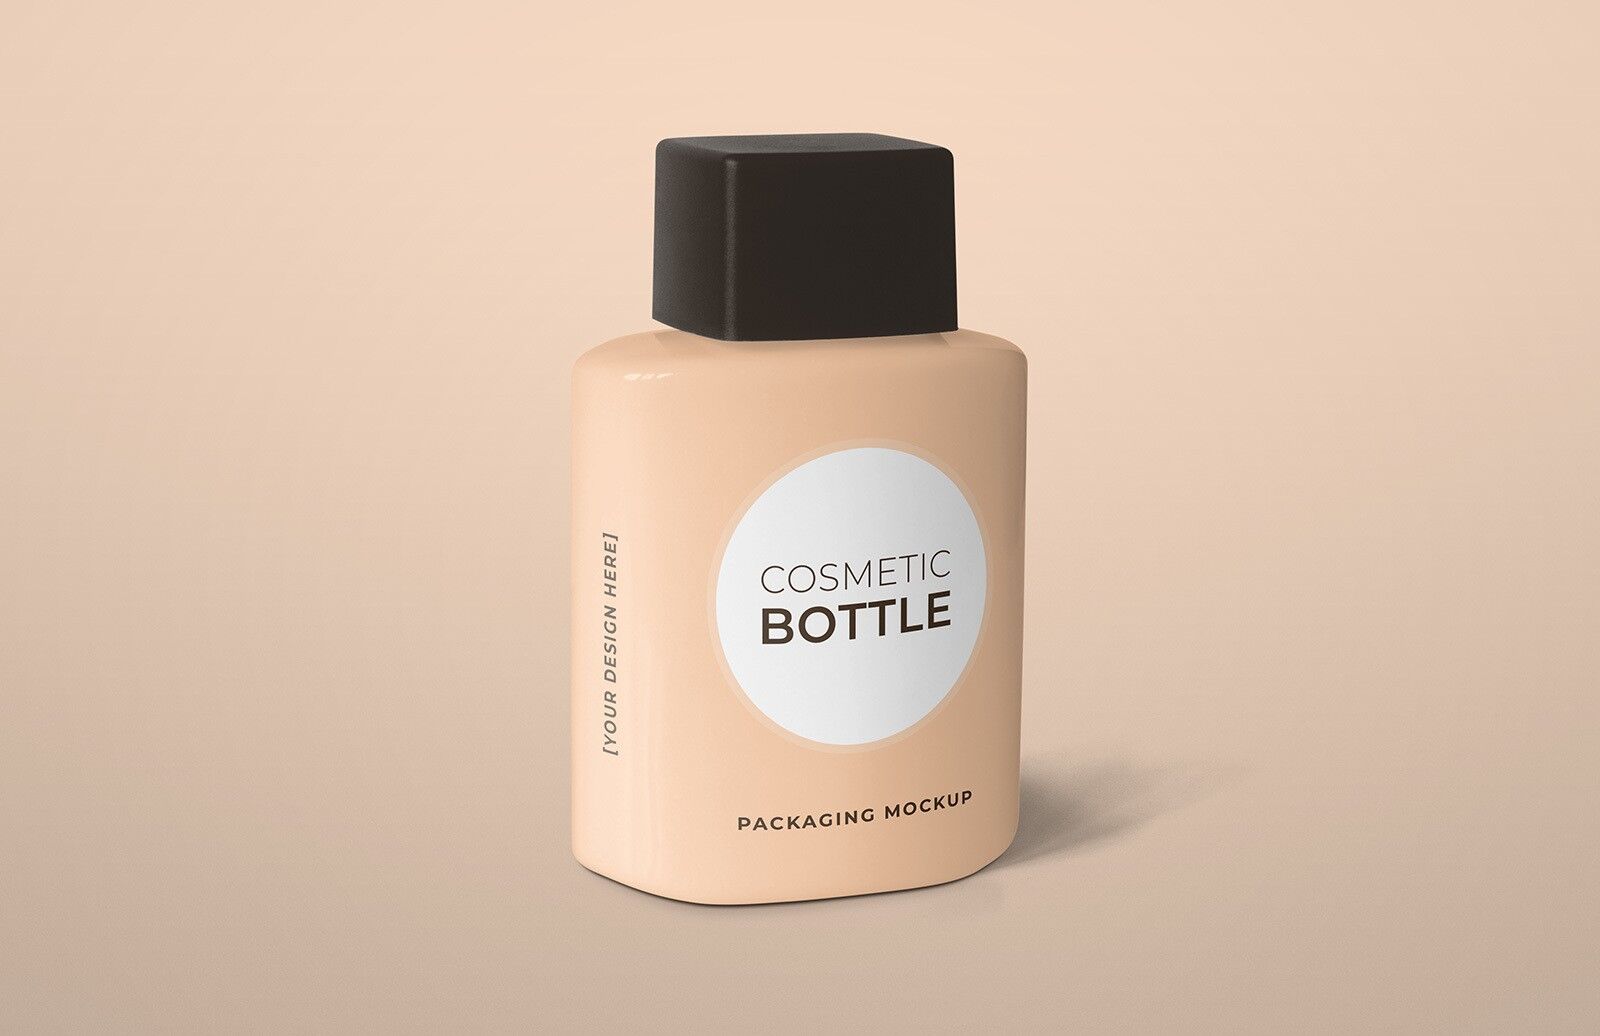 Mockup of a Medium sized Cosmetic Bottle Packaging FREE PSD